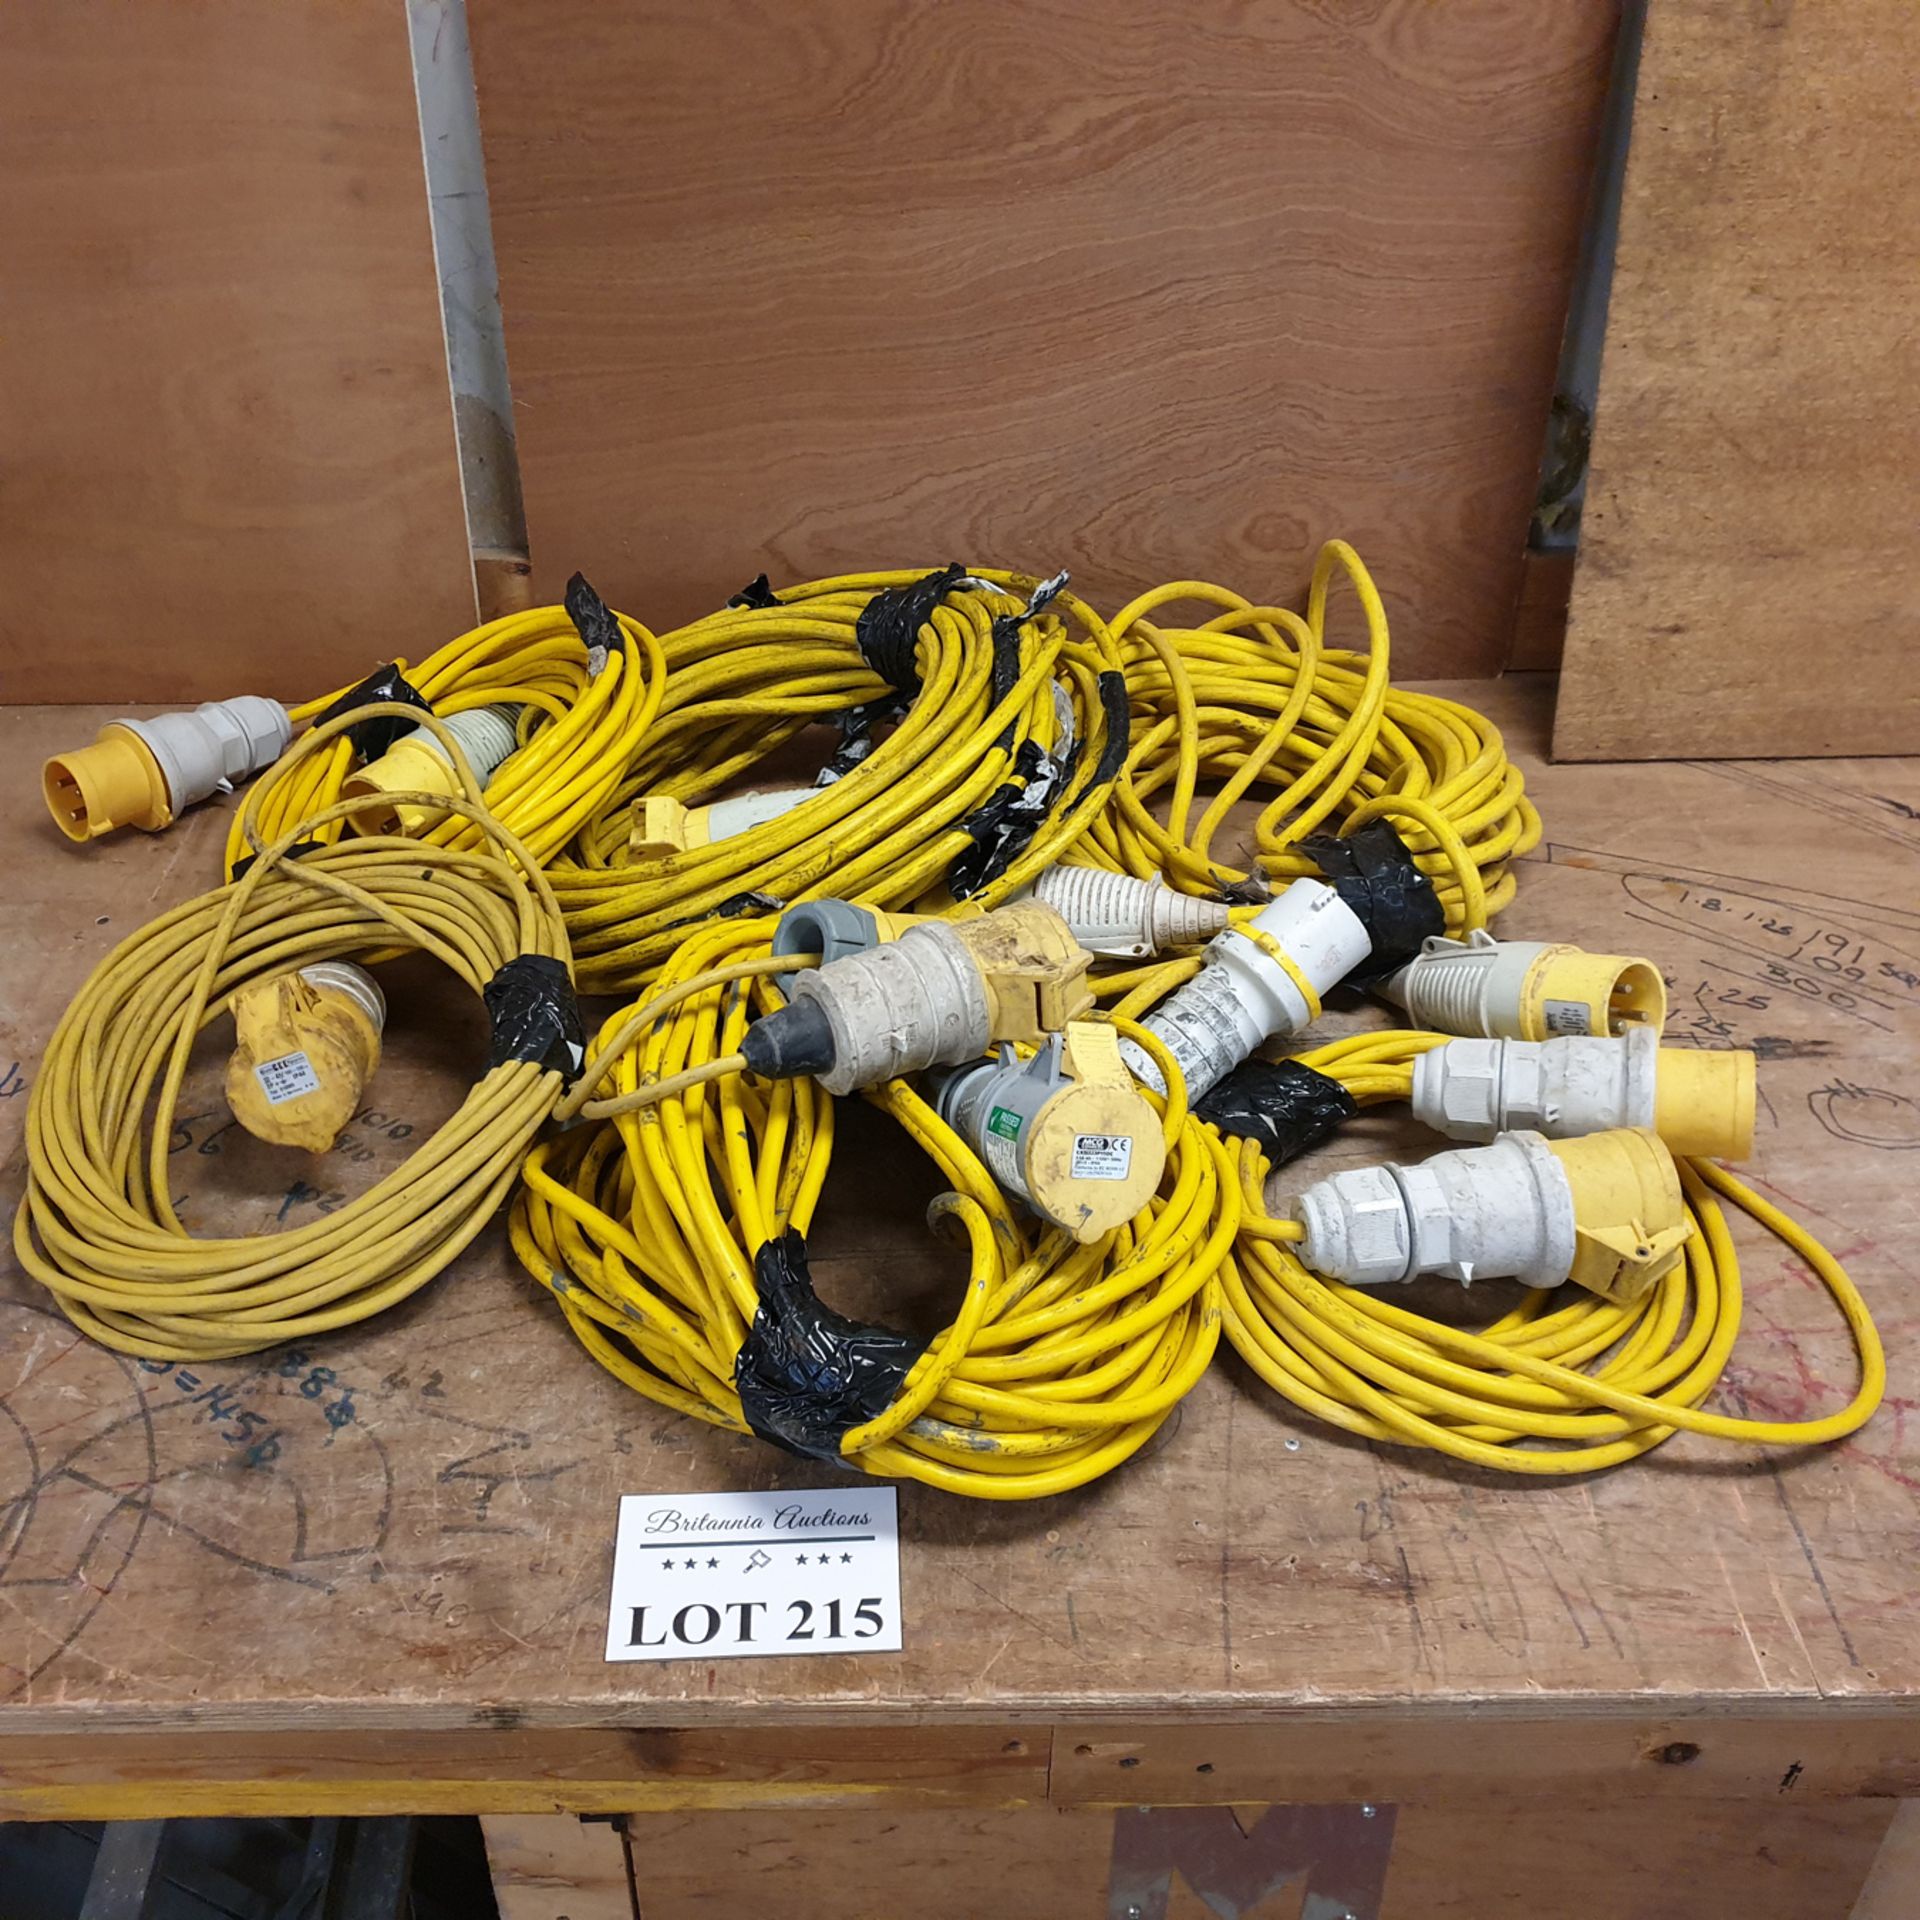 Quantity of 6, 110v Extension Leads.